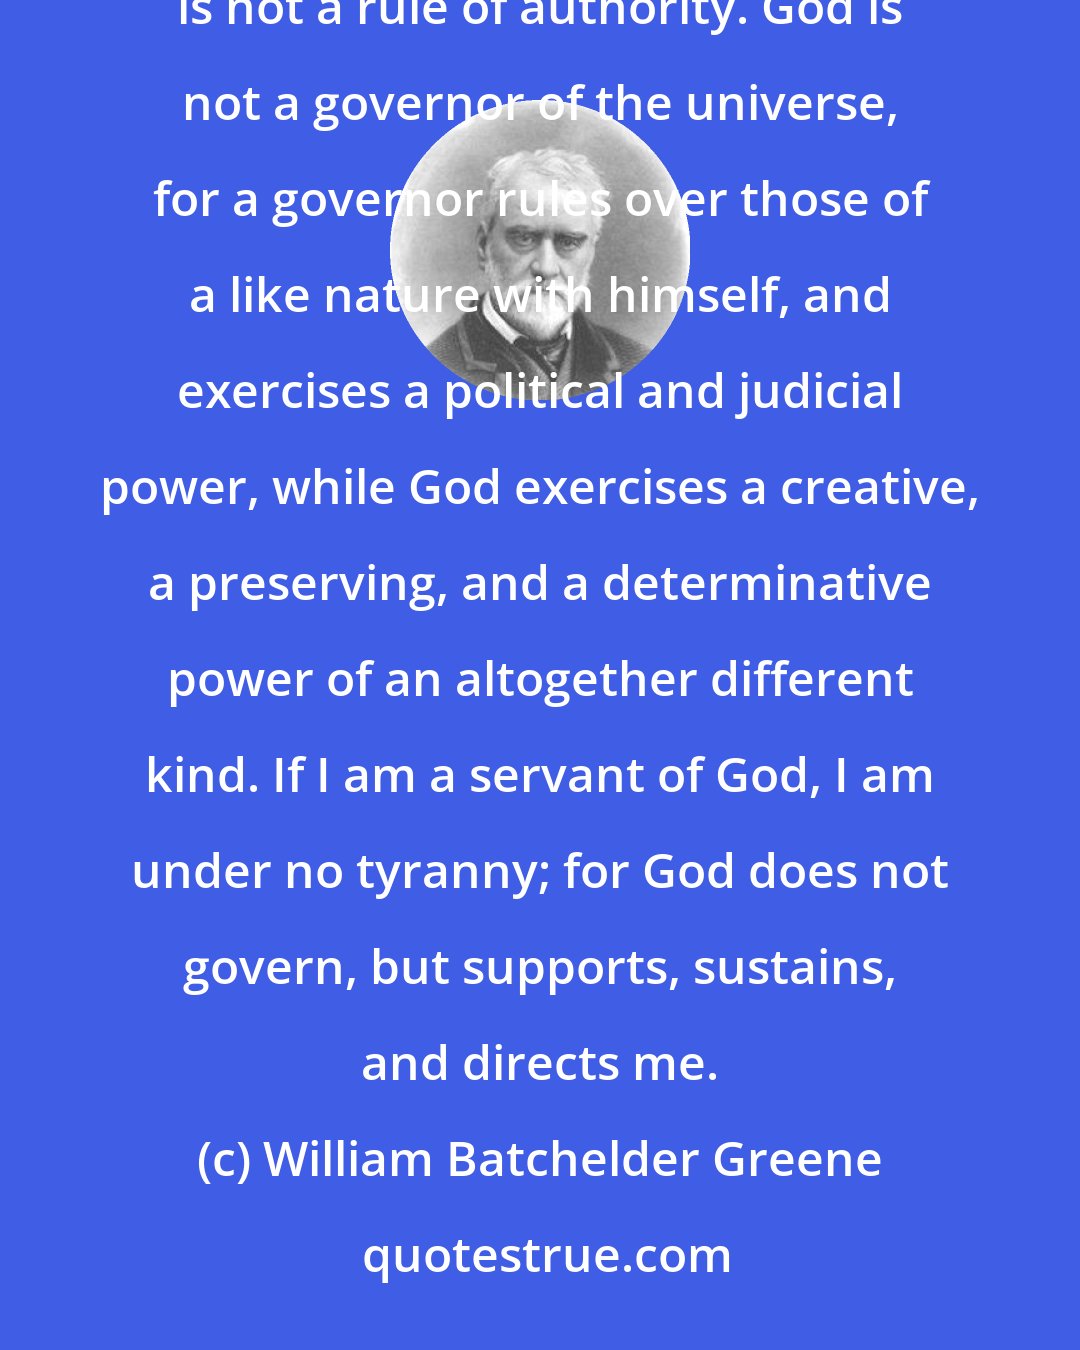 William Batchelder Greene: The rule of God is not tyranny, for it does not partake of a political or governmental character -- it is not a rule of authority. God is not a governor of the universe, for a governor rules over those of a like nature with himself, and exercises a political and judicial power, while God exercises a creative, a preserving, and a determinative power of an altogether different kind. If I am a servant of God, I am under no tyranny; for God does not govern, but supports, sustains, and directs me.